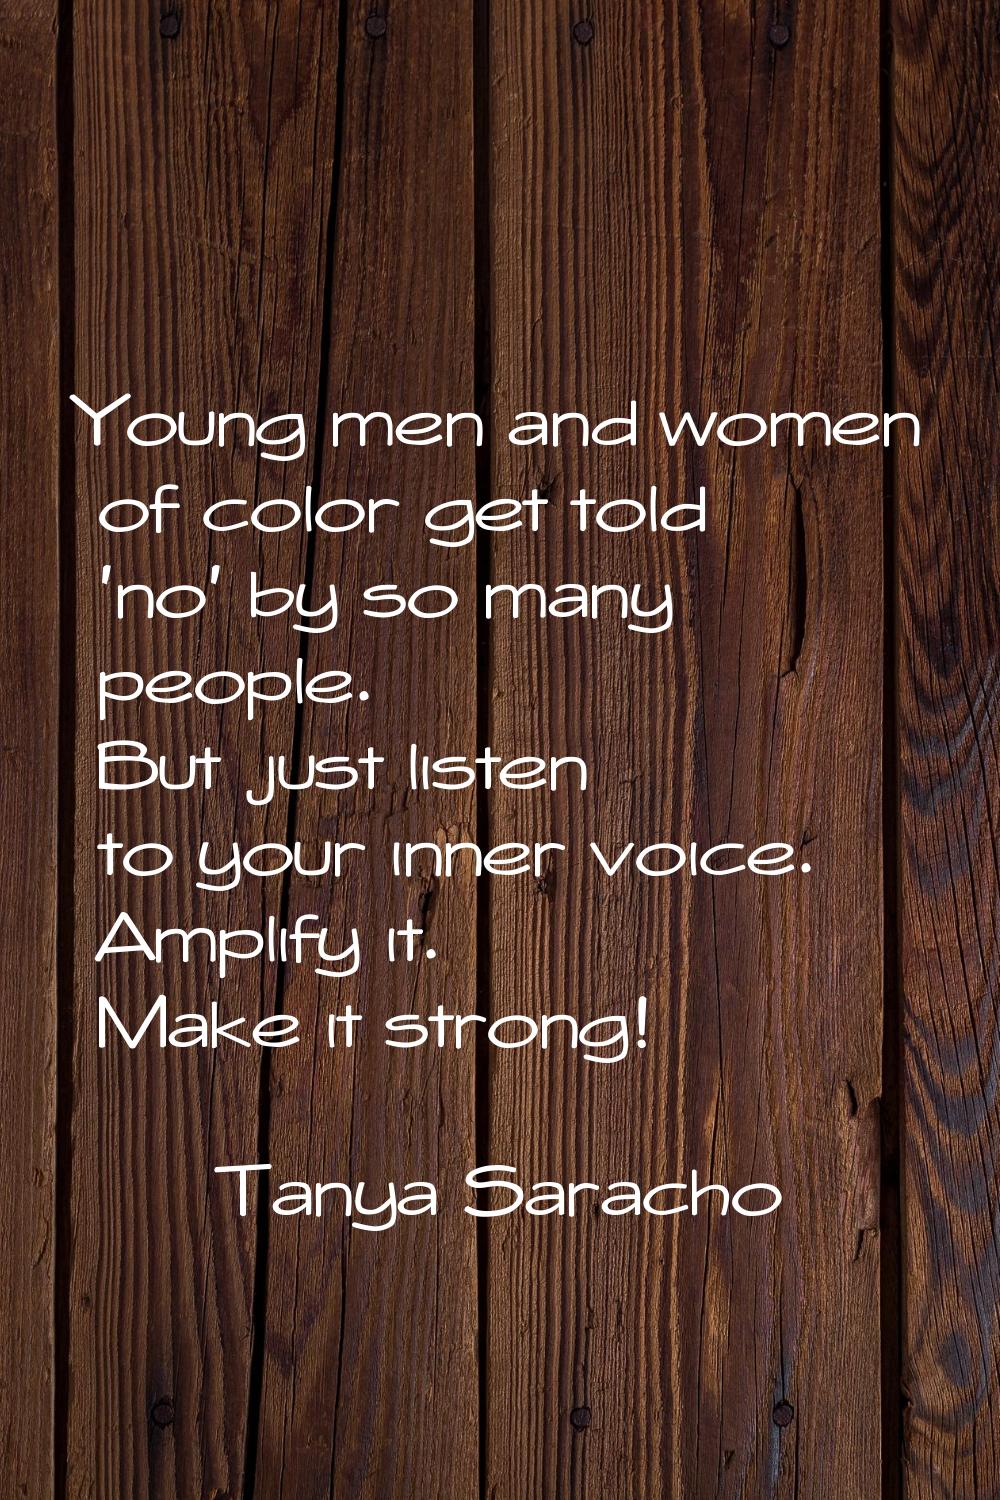 Young men and women of color get told 'no' by so many people. But just listen to your inner voice. 